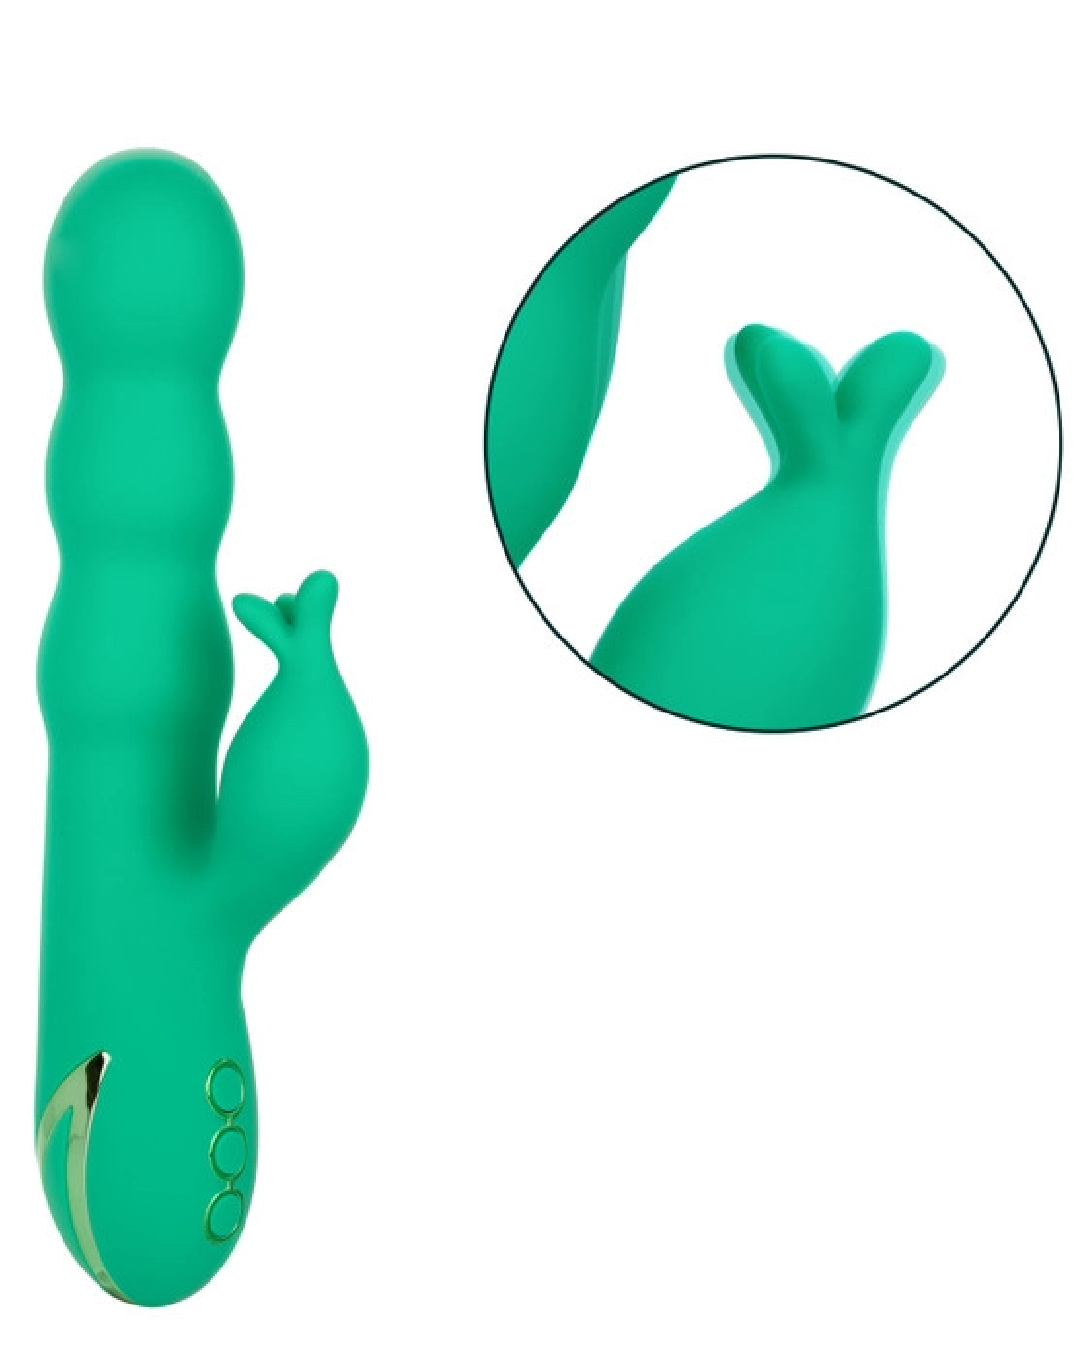 California Dreaming Sonoma Satisfyer Dual Stimulation Vibrator with inset graphic showing movement 